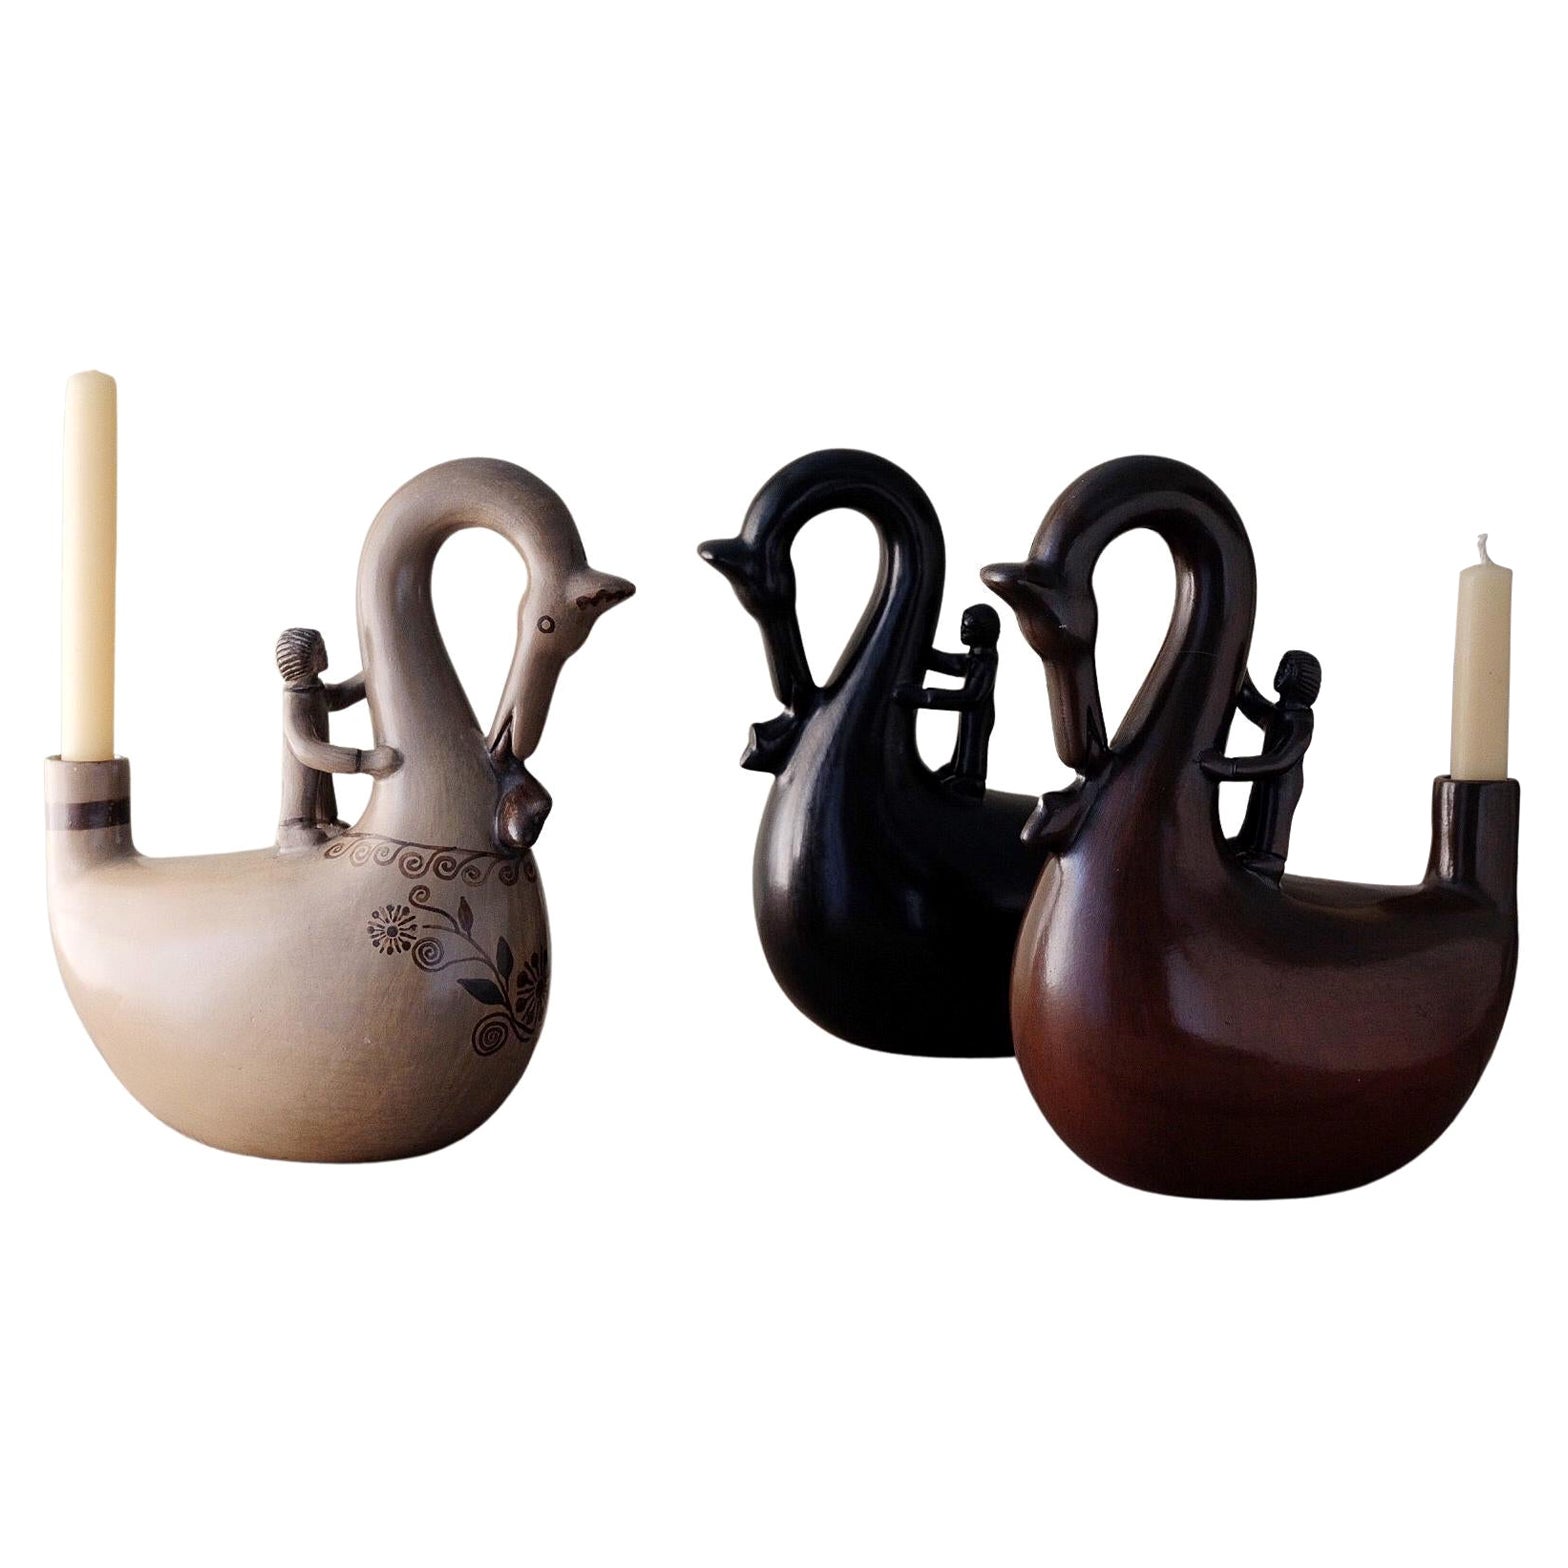 Set of 3 Acatlán Tototl Candleholders by Onora For Sale